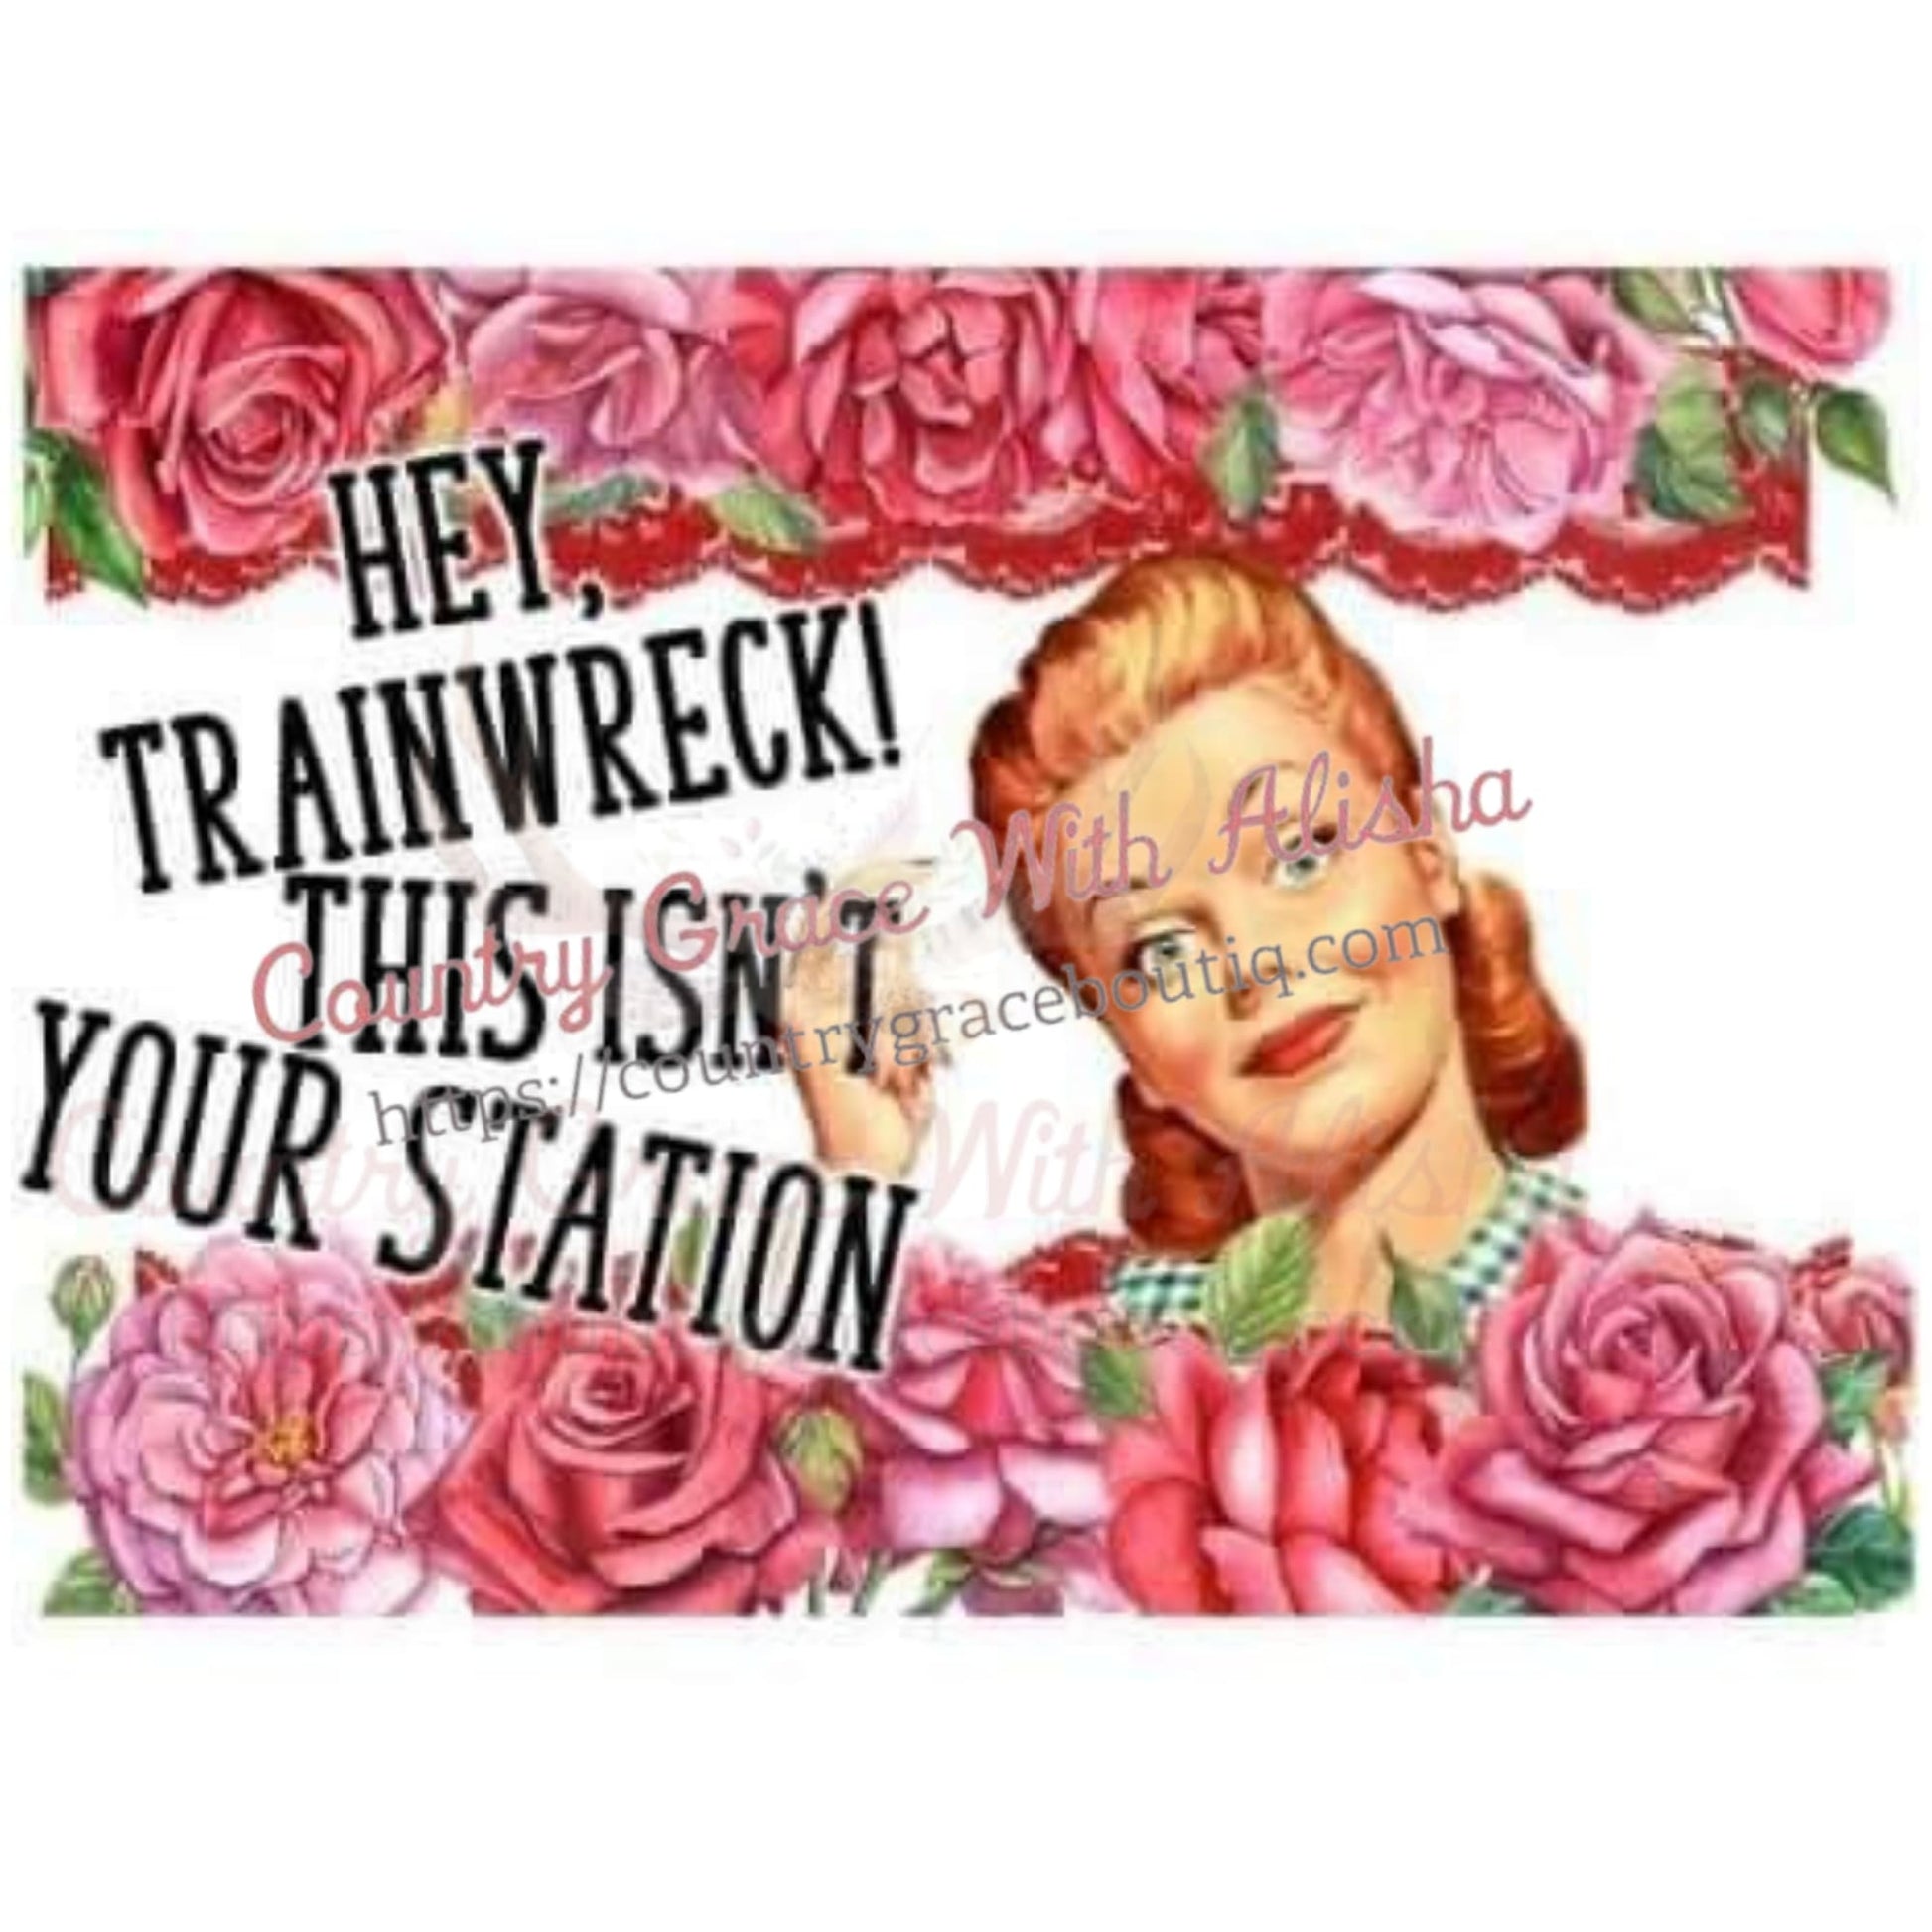 Hey Trainwreck Sublimation Transfer - Sub $1.50 Country 